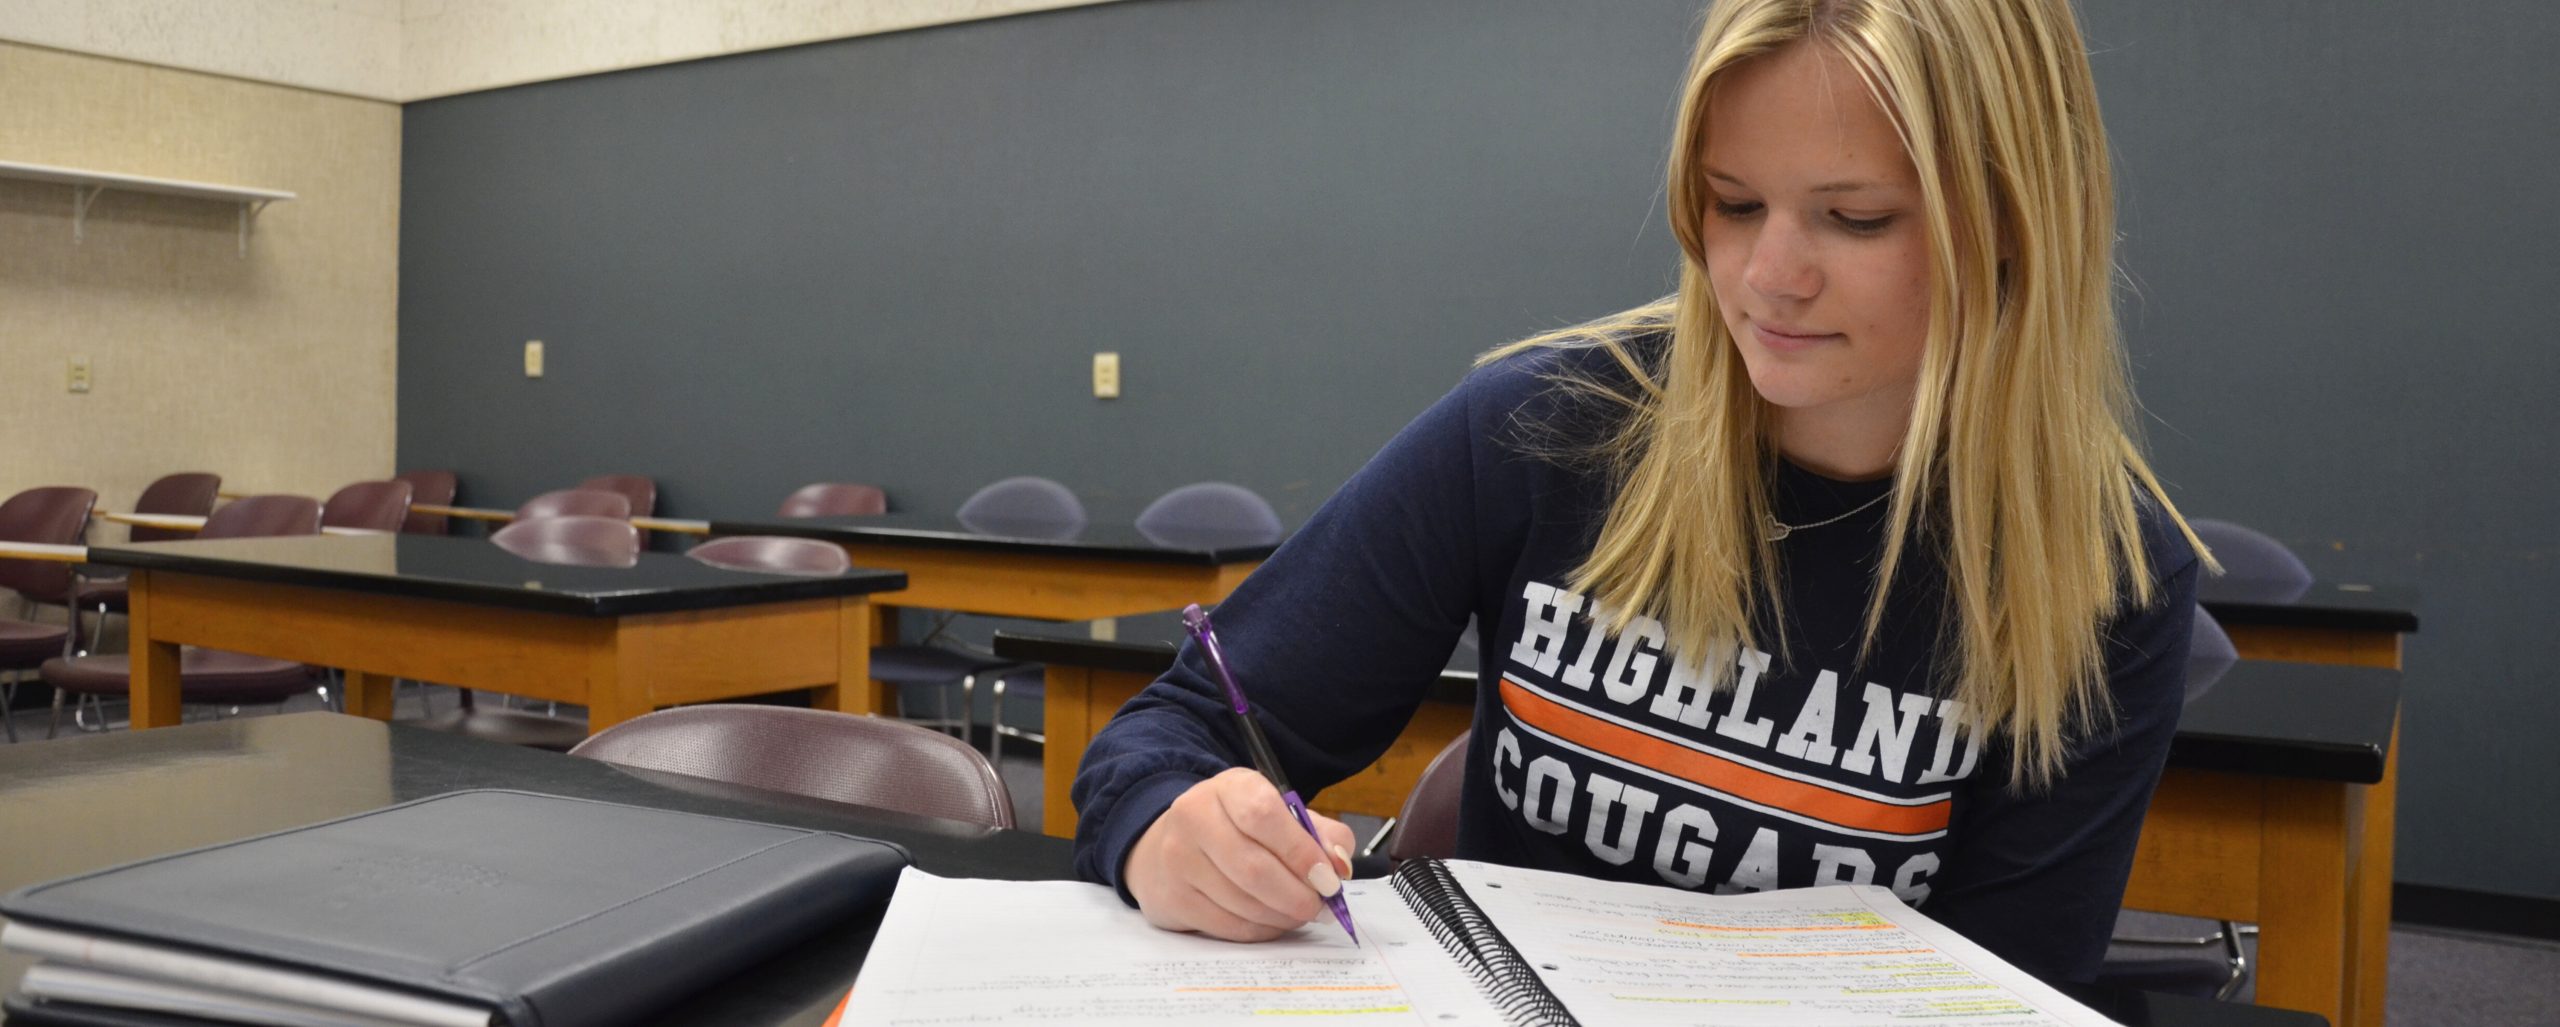 A blond student writing in a notebook in class.